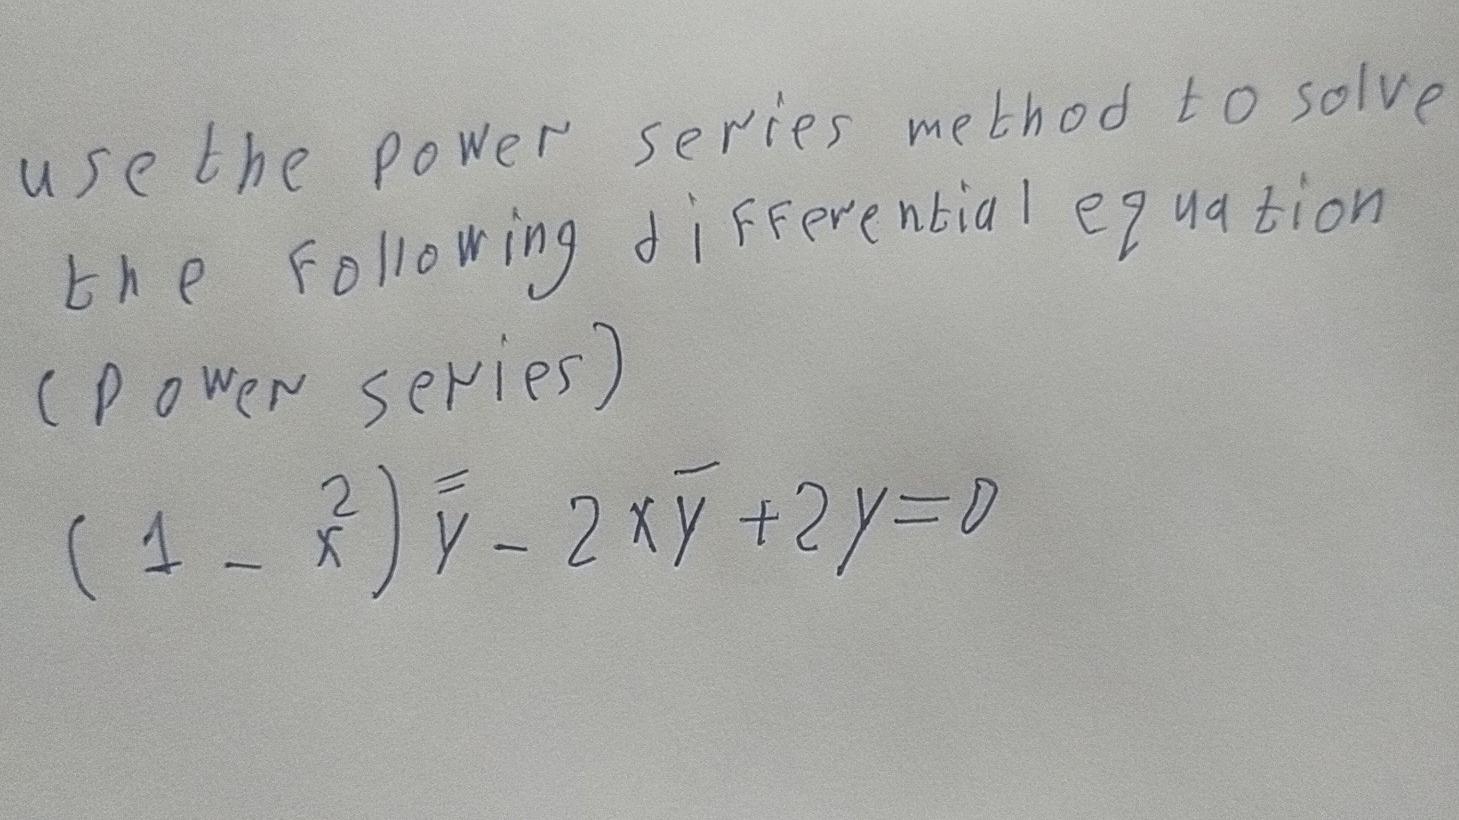 Use The Power Series Method To Solve The Following Differential Equation Power Series 1 Y 2 X 9 2y 0 1